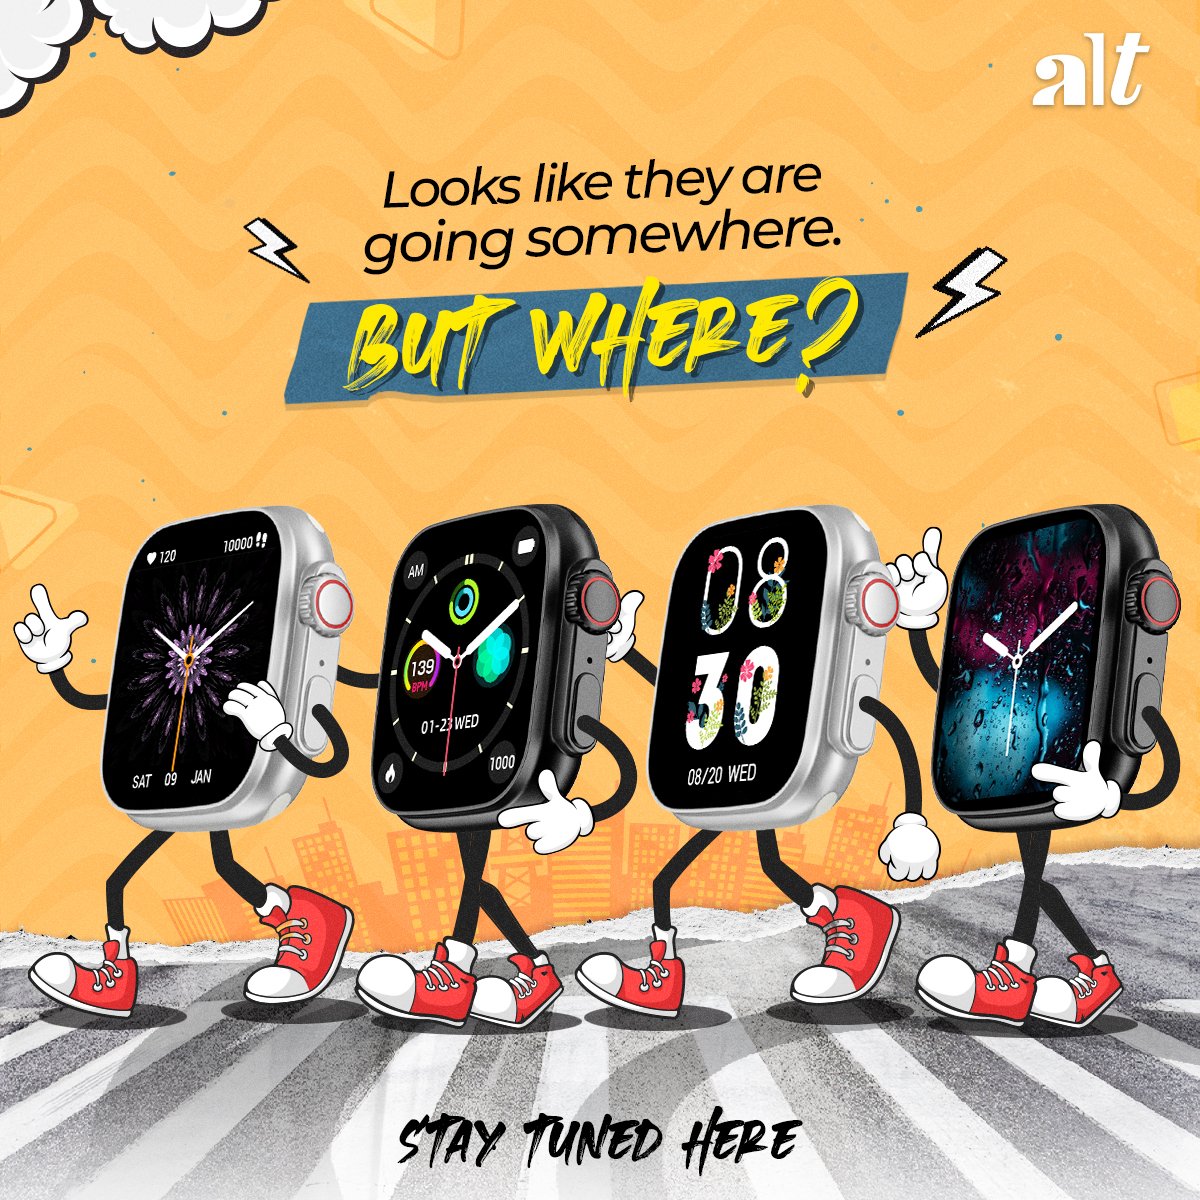 Uh oh! Something's brewing up!
Are you able to keep your excitement in check? Because we sure can't! 😀
Stay tuned for what's coming next.

#smartwatches #smartgadgets #smartwatchindia #smartwatch #wearables #techgadgets #watchfaces #inbuitgames #healthmonitors #sportsmodes